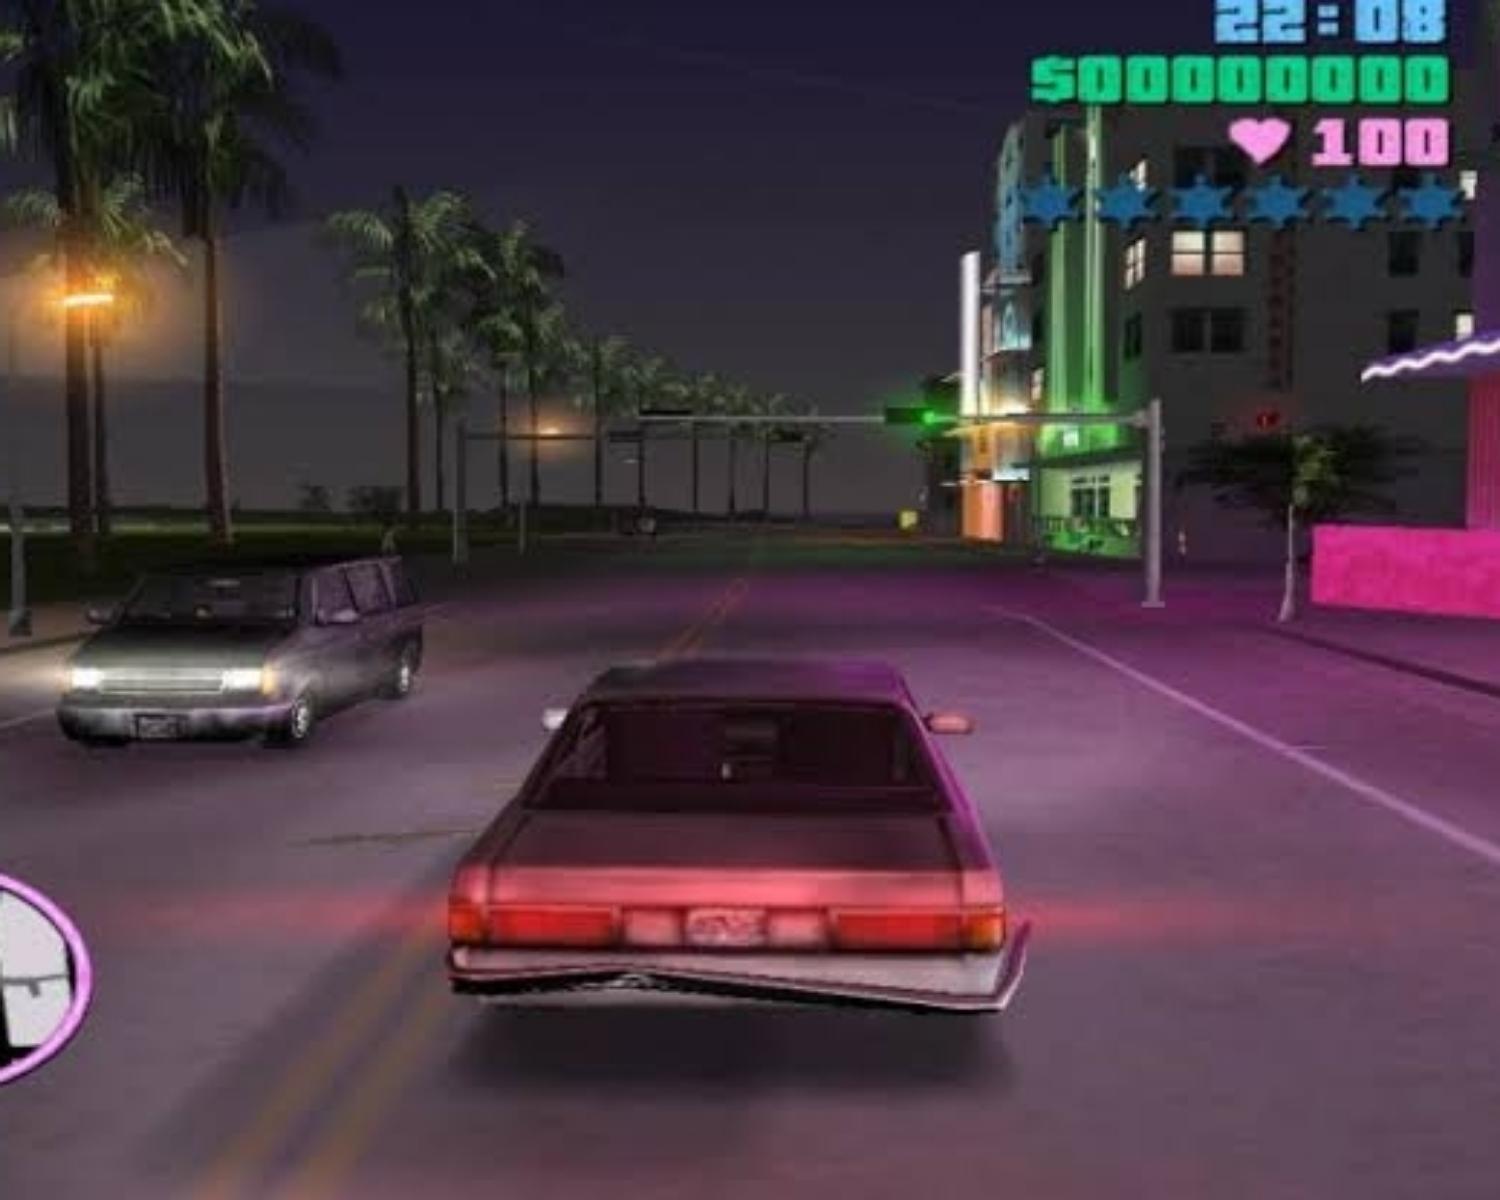 2) It‘s one of the few GTA titles with Vice City as a location